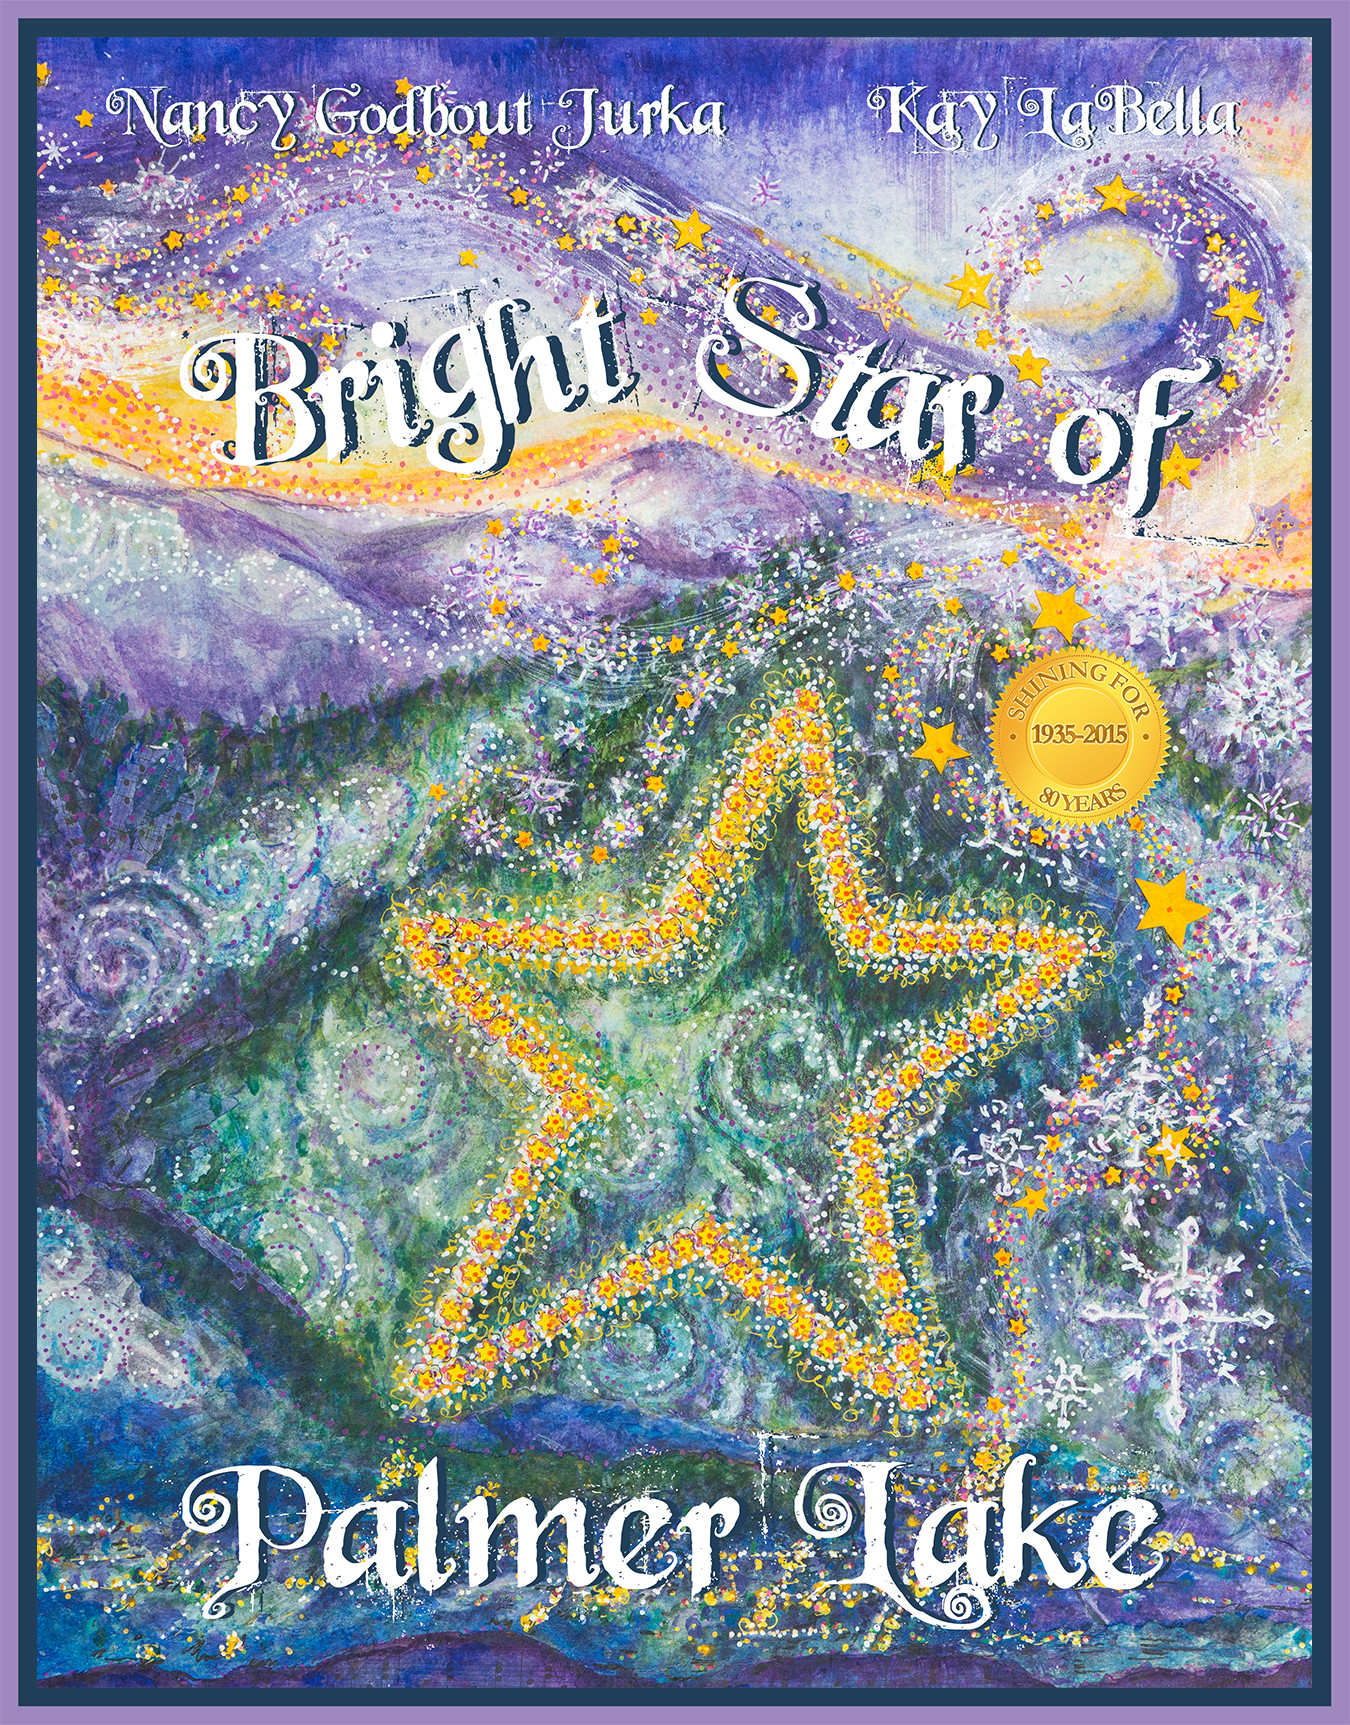 Book cover of Bright Star of Palmer Lake by Nancy Godbout Jurka